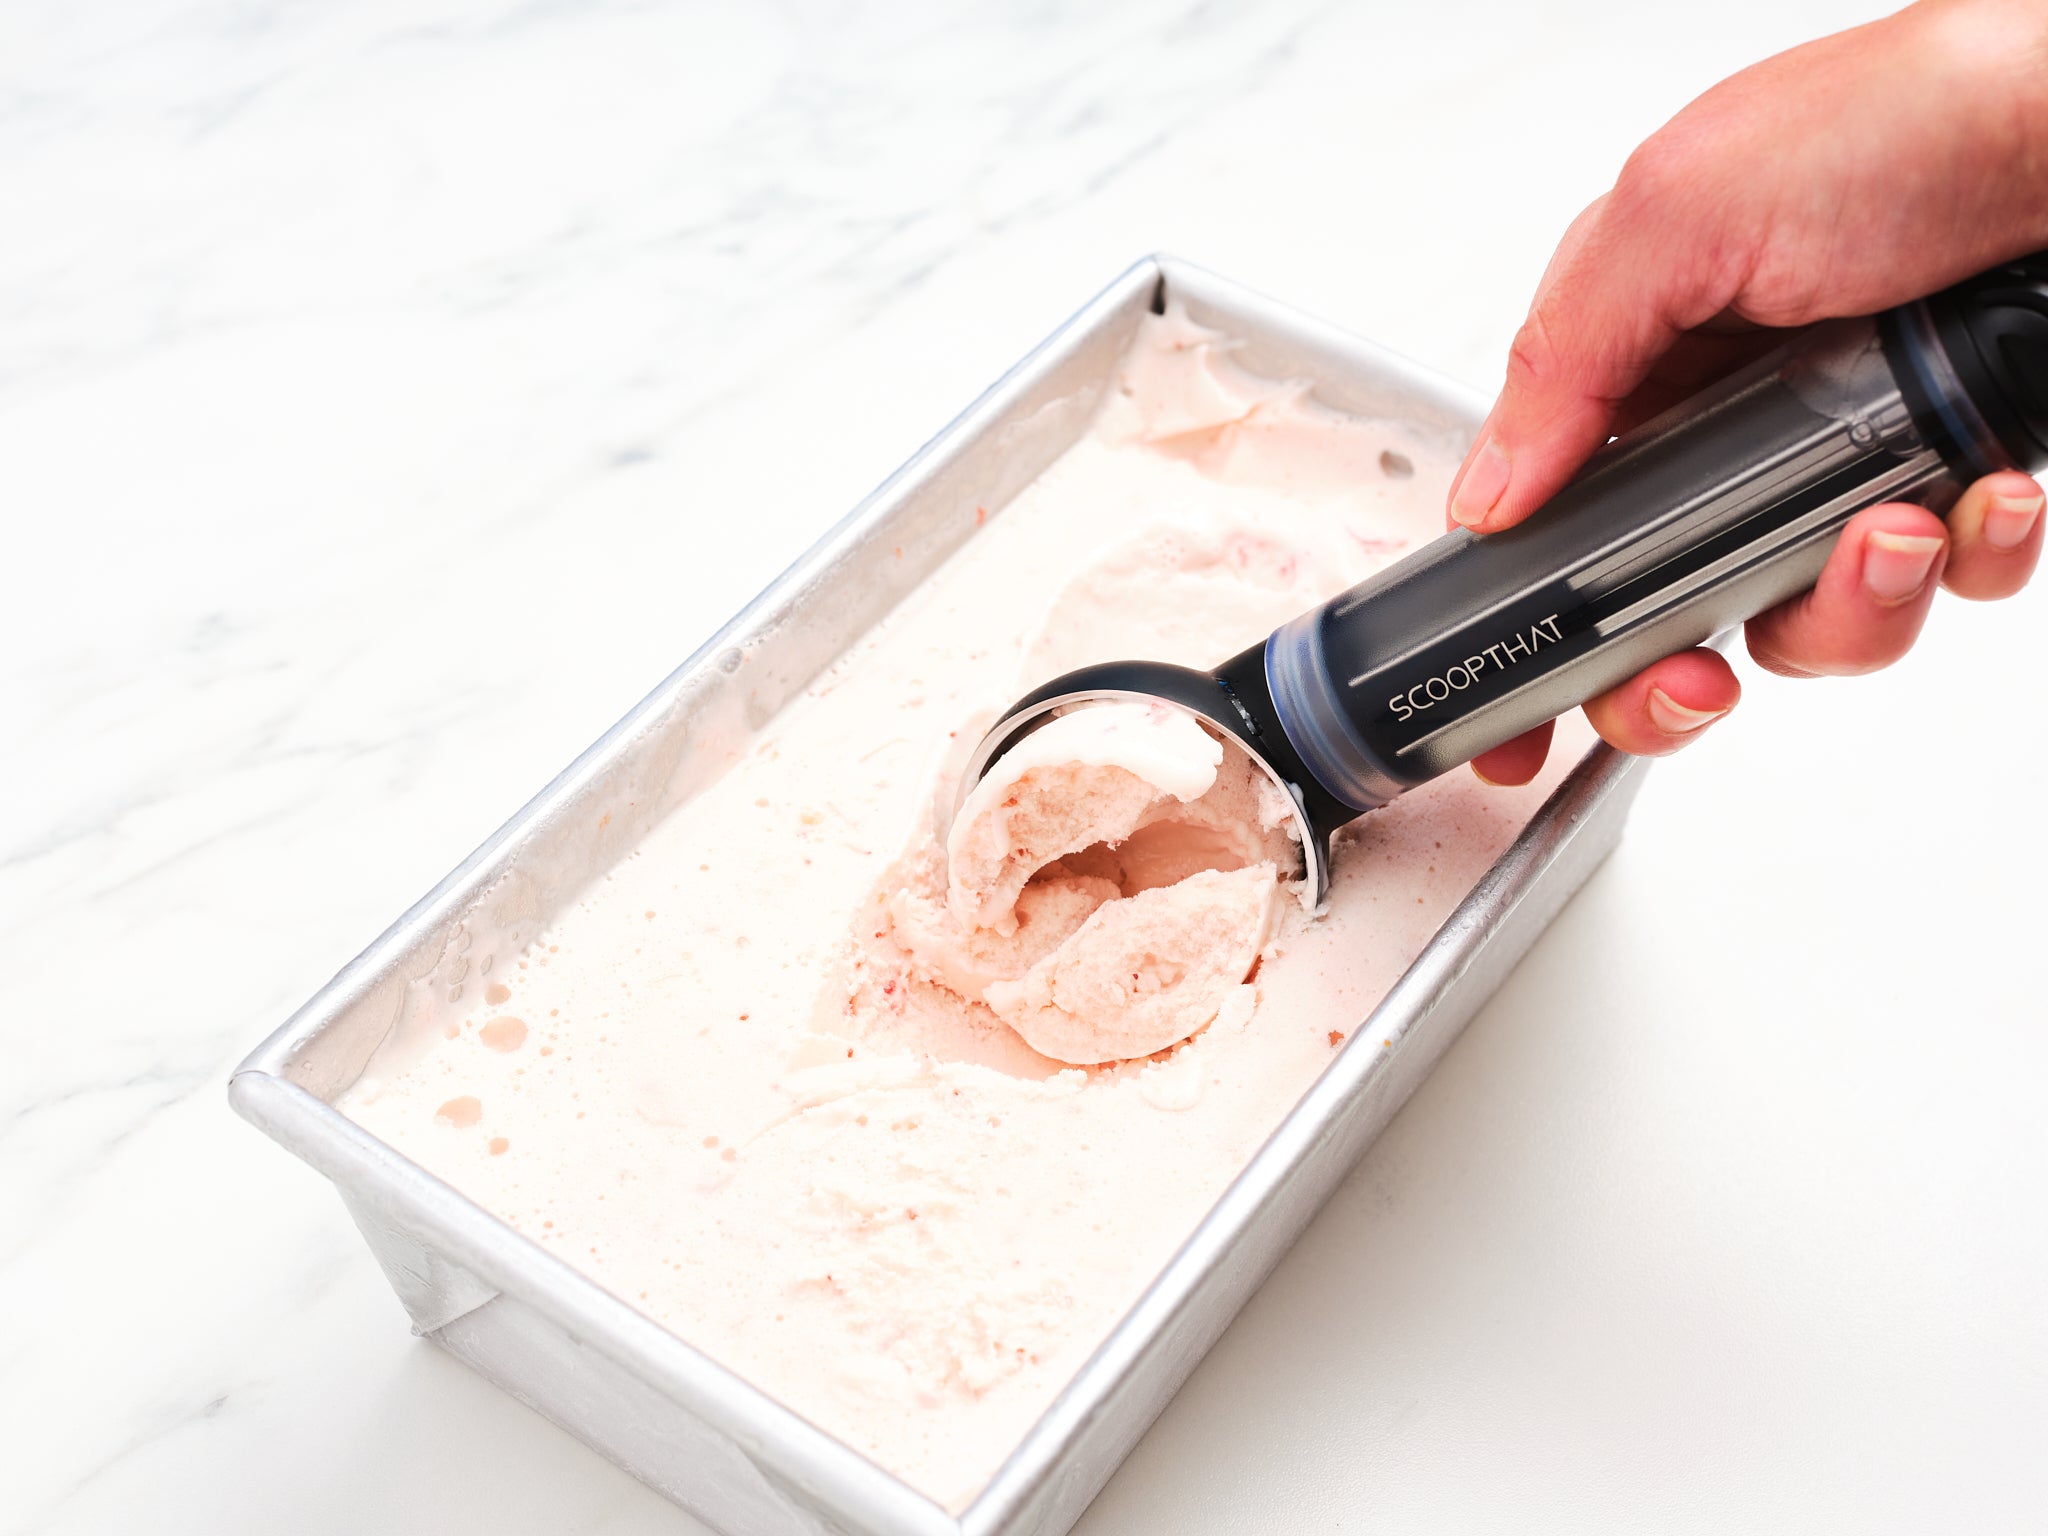 ScoopThat! and SpreadThat! self-warming ice cream scoop and butter